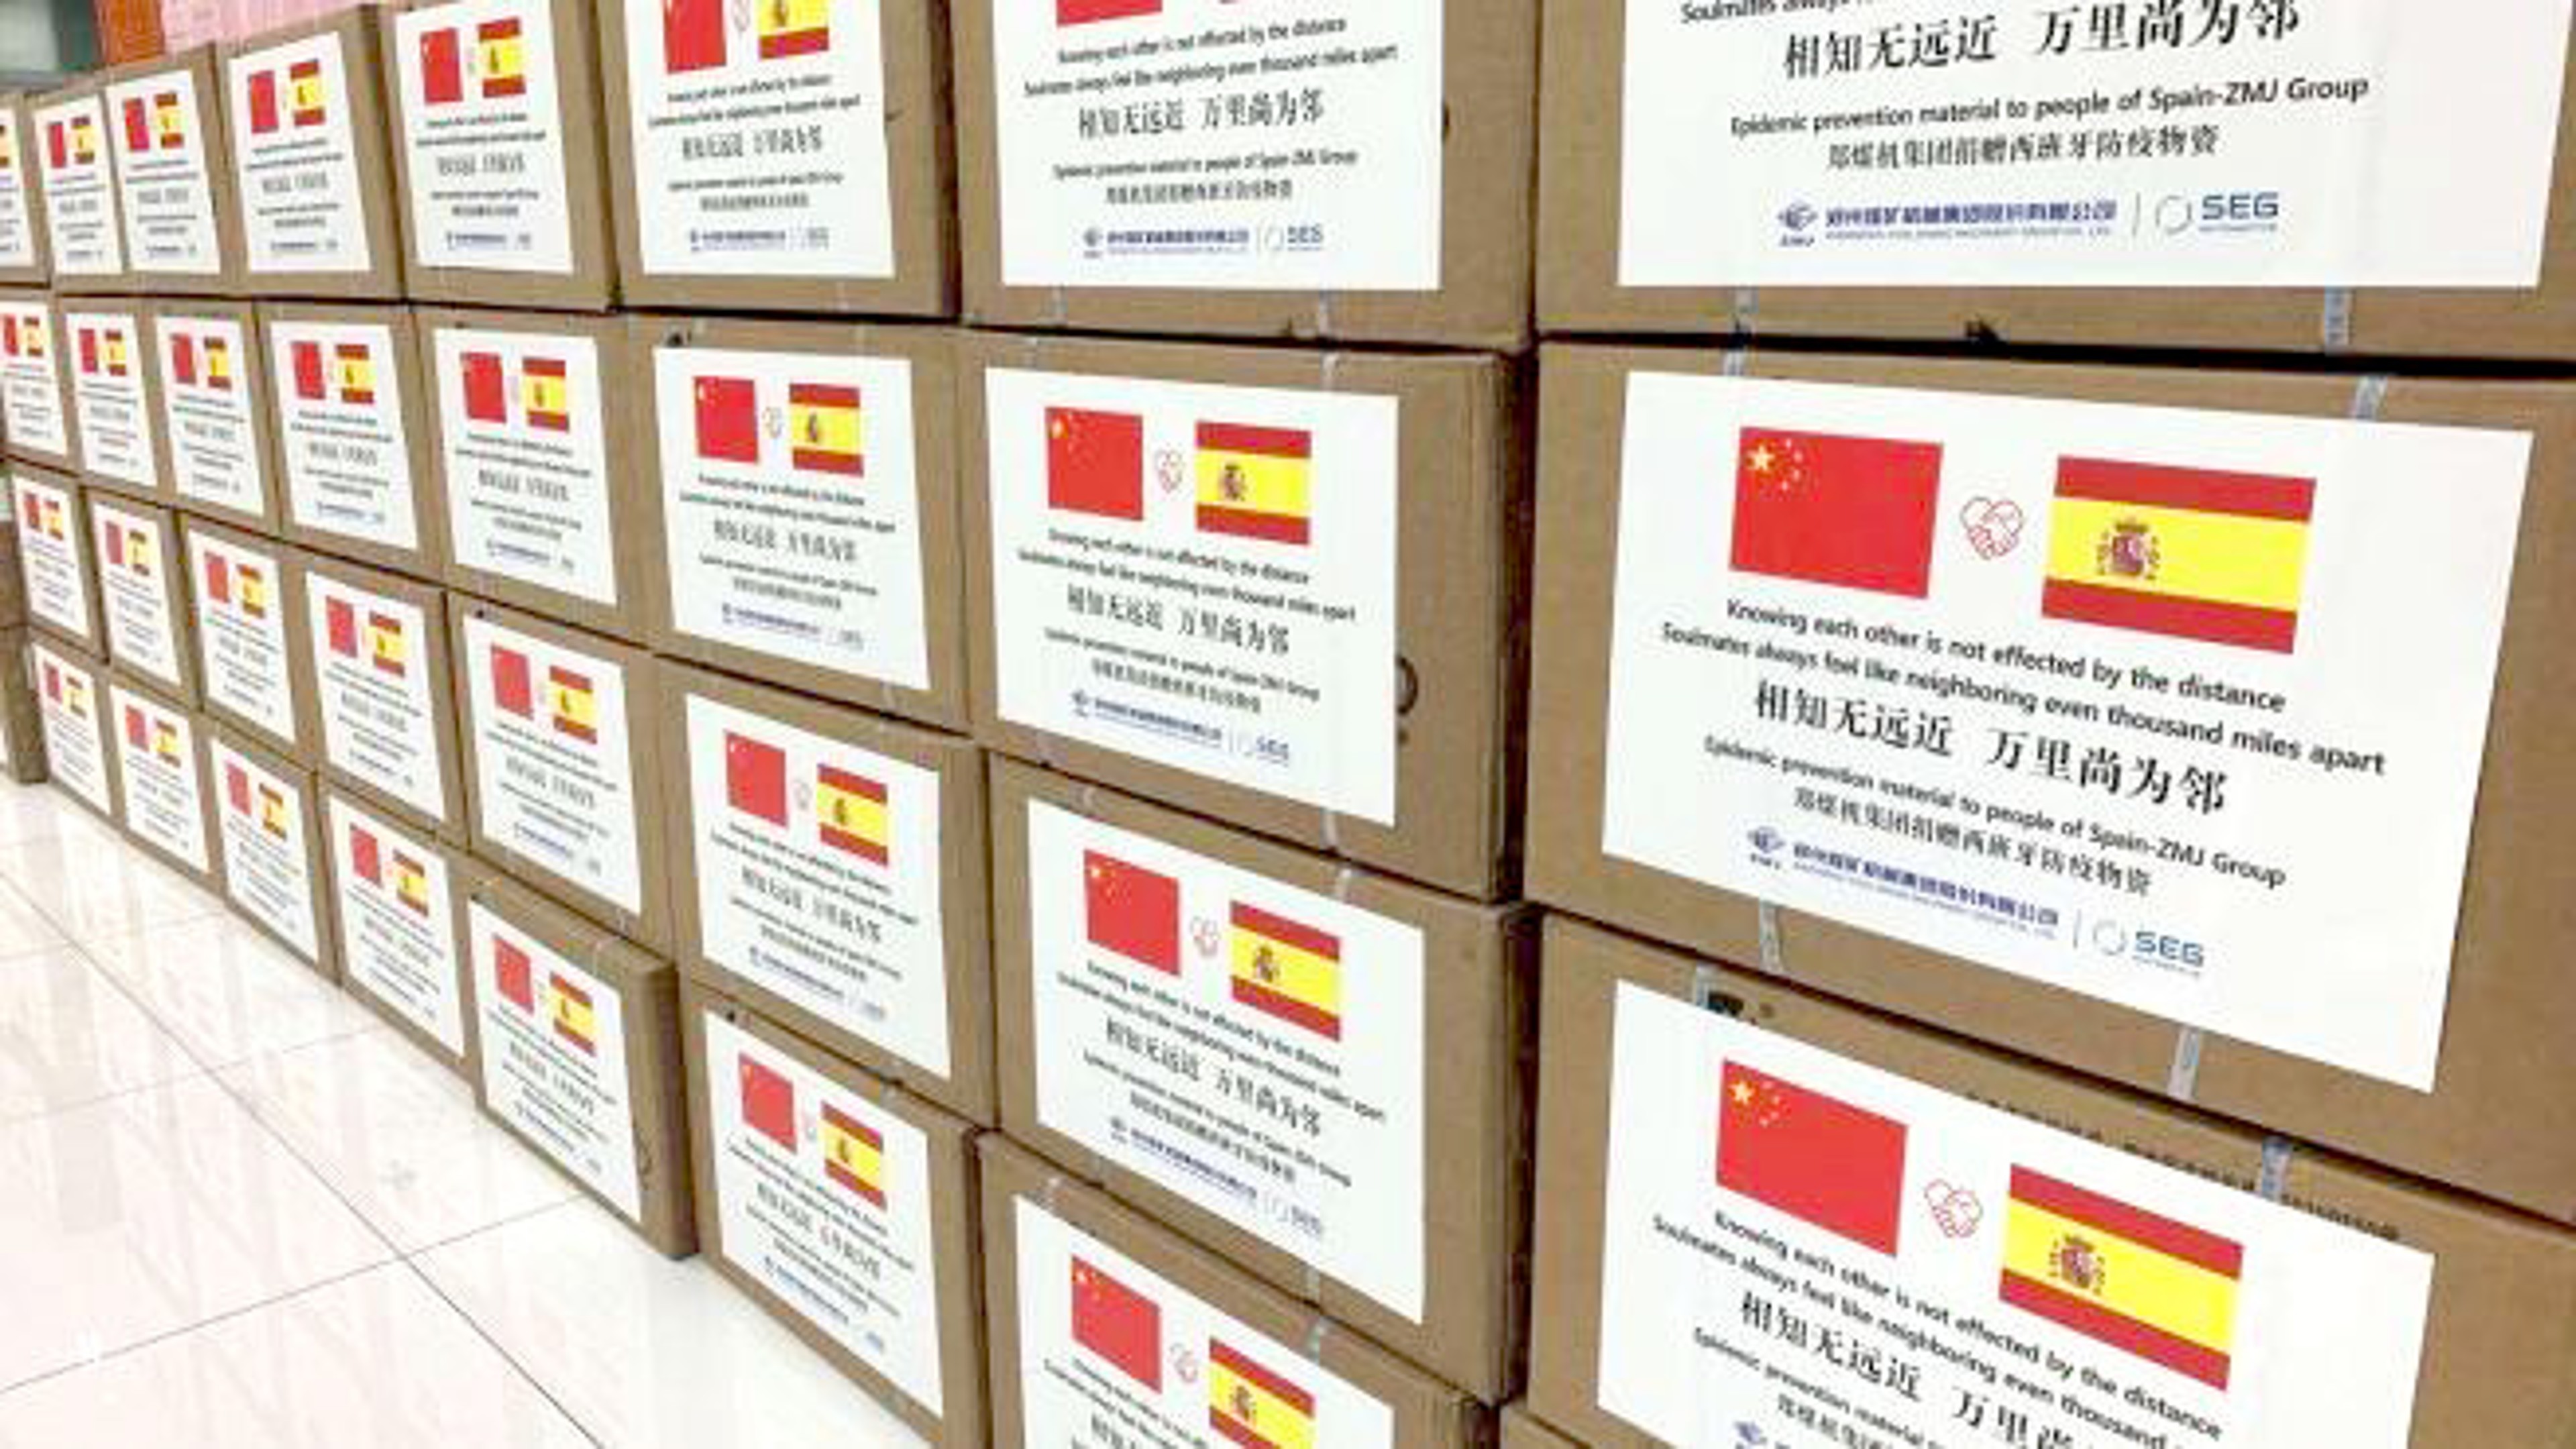 Boxes of clinical face masks from China to support public health in Spain